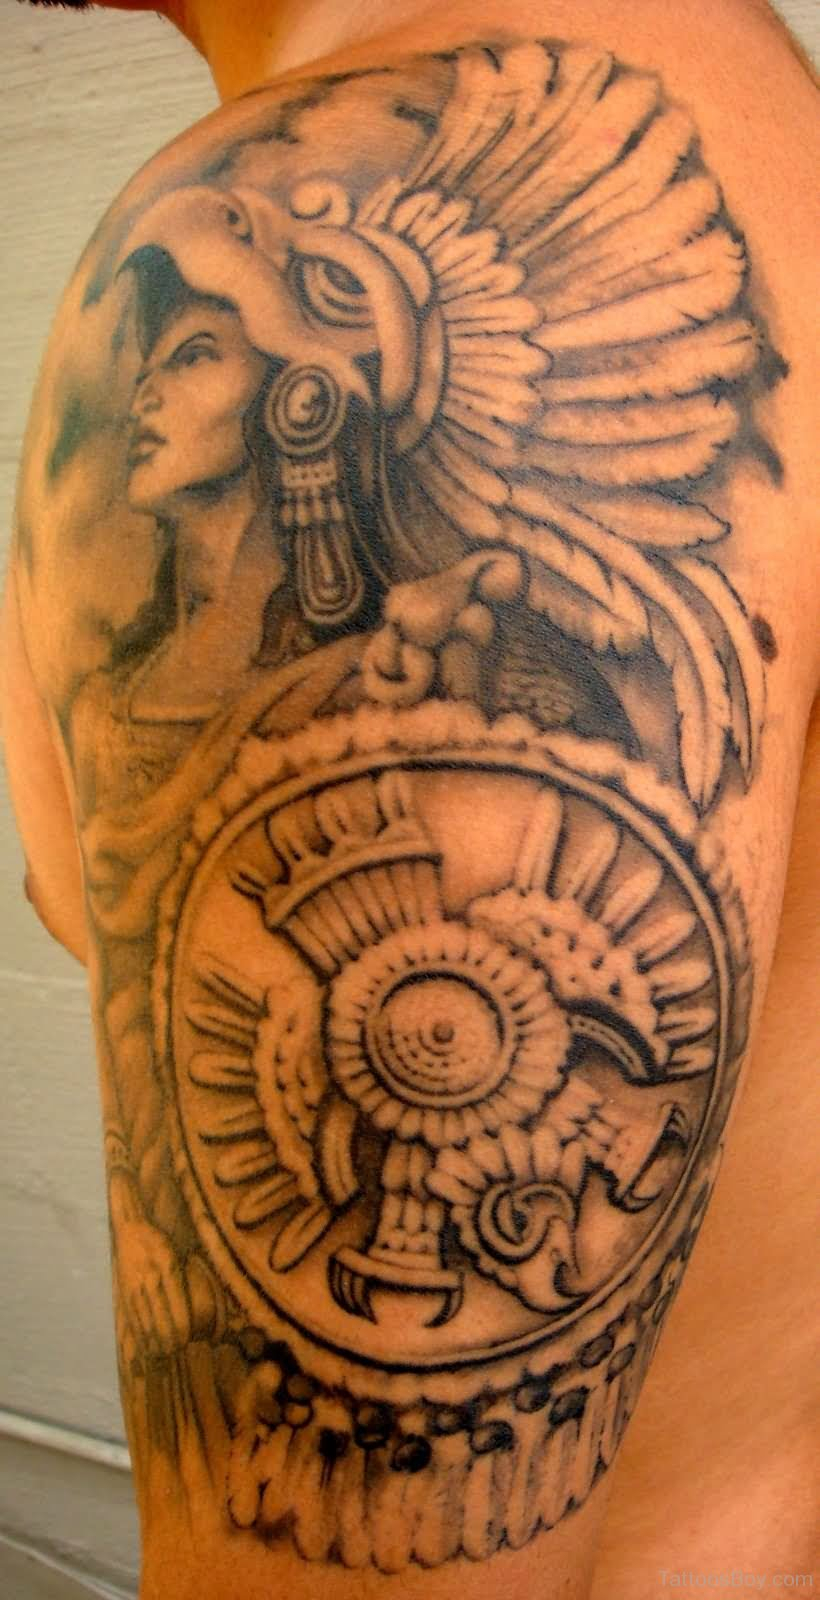 Aztec Tattoo Design On Shoulder Tattoo Designs Tattoo Pictures in size 820 X 1600